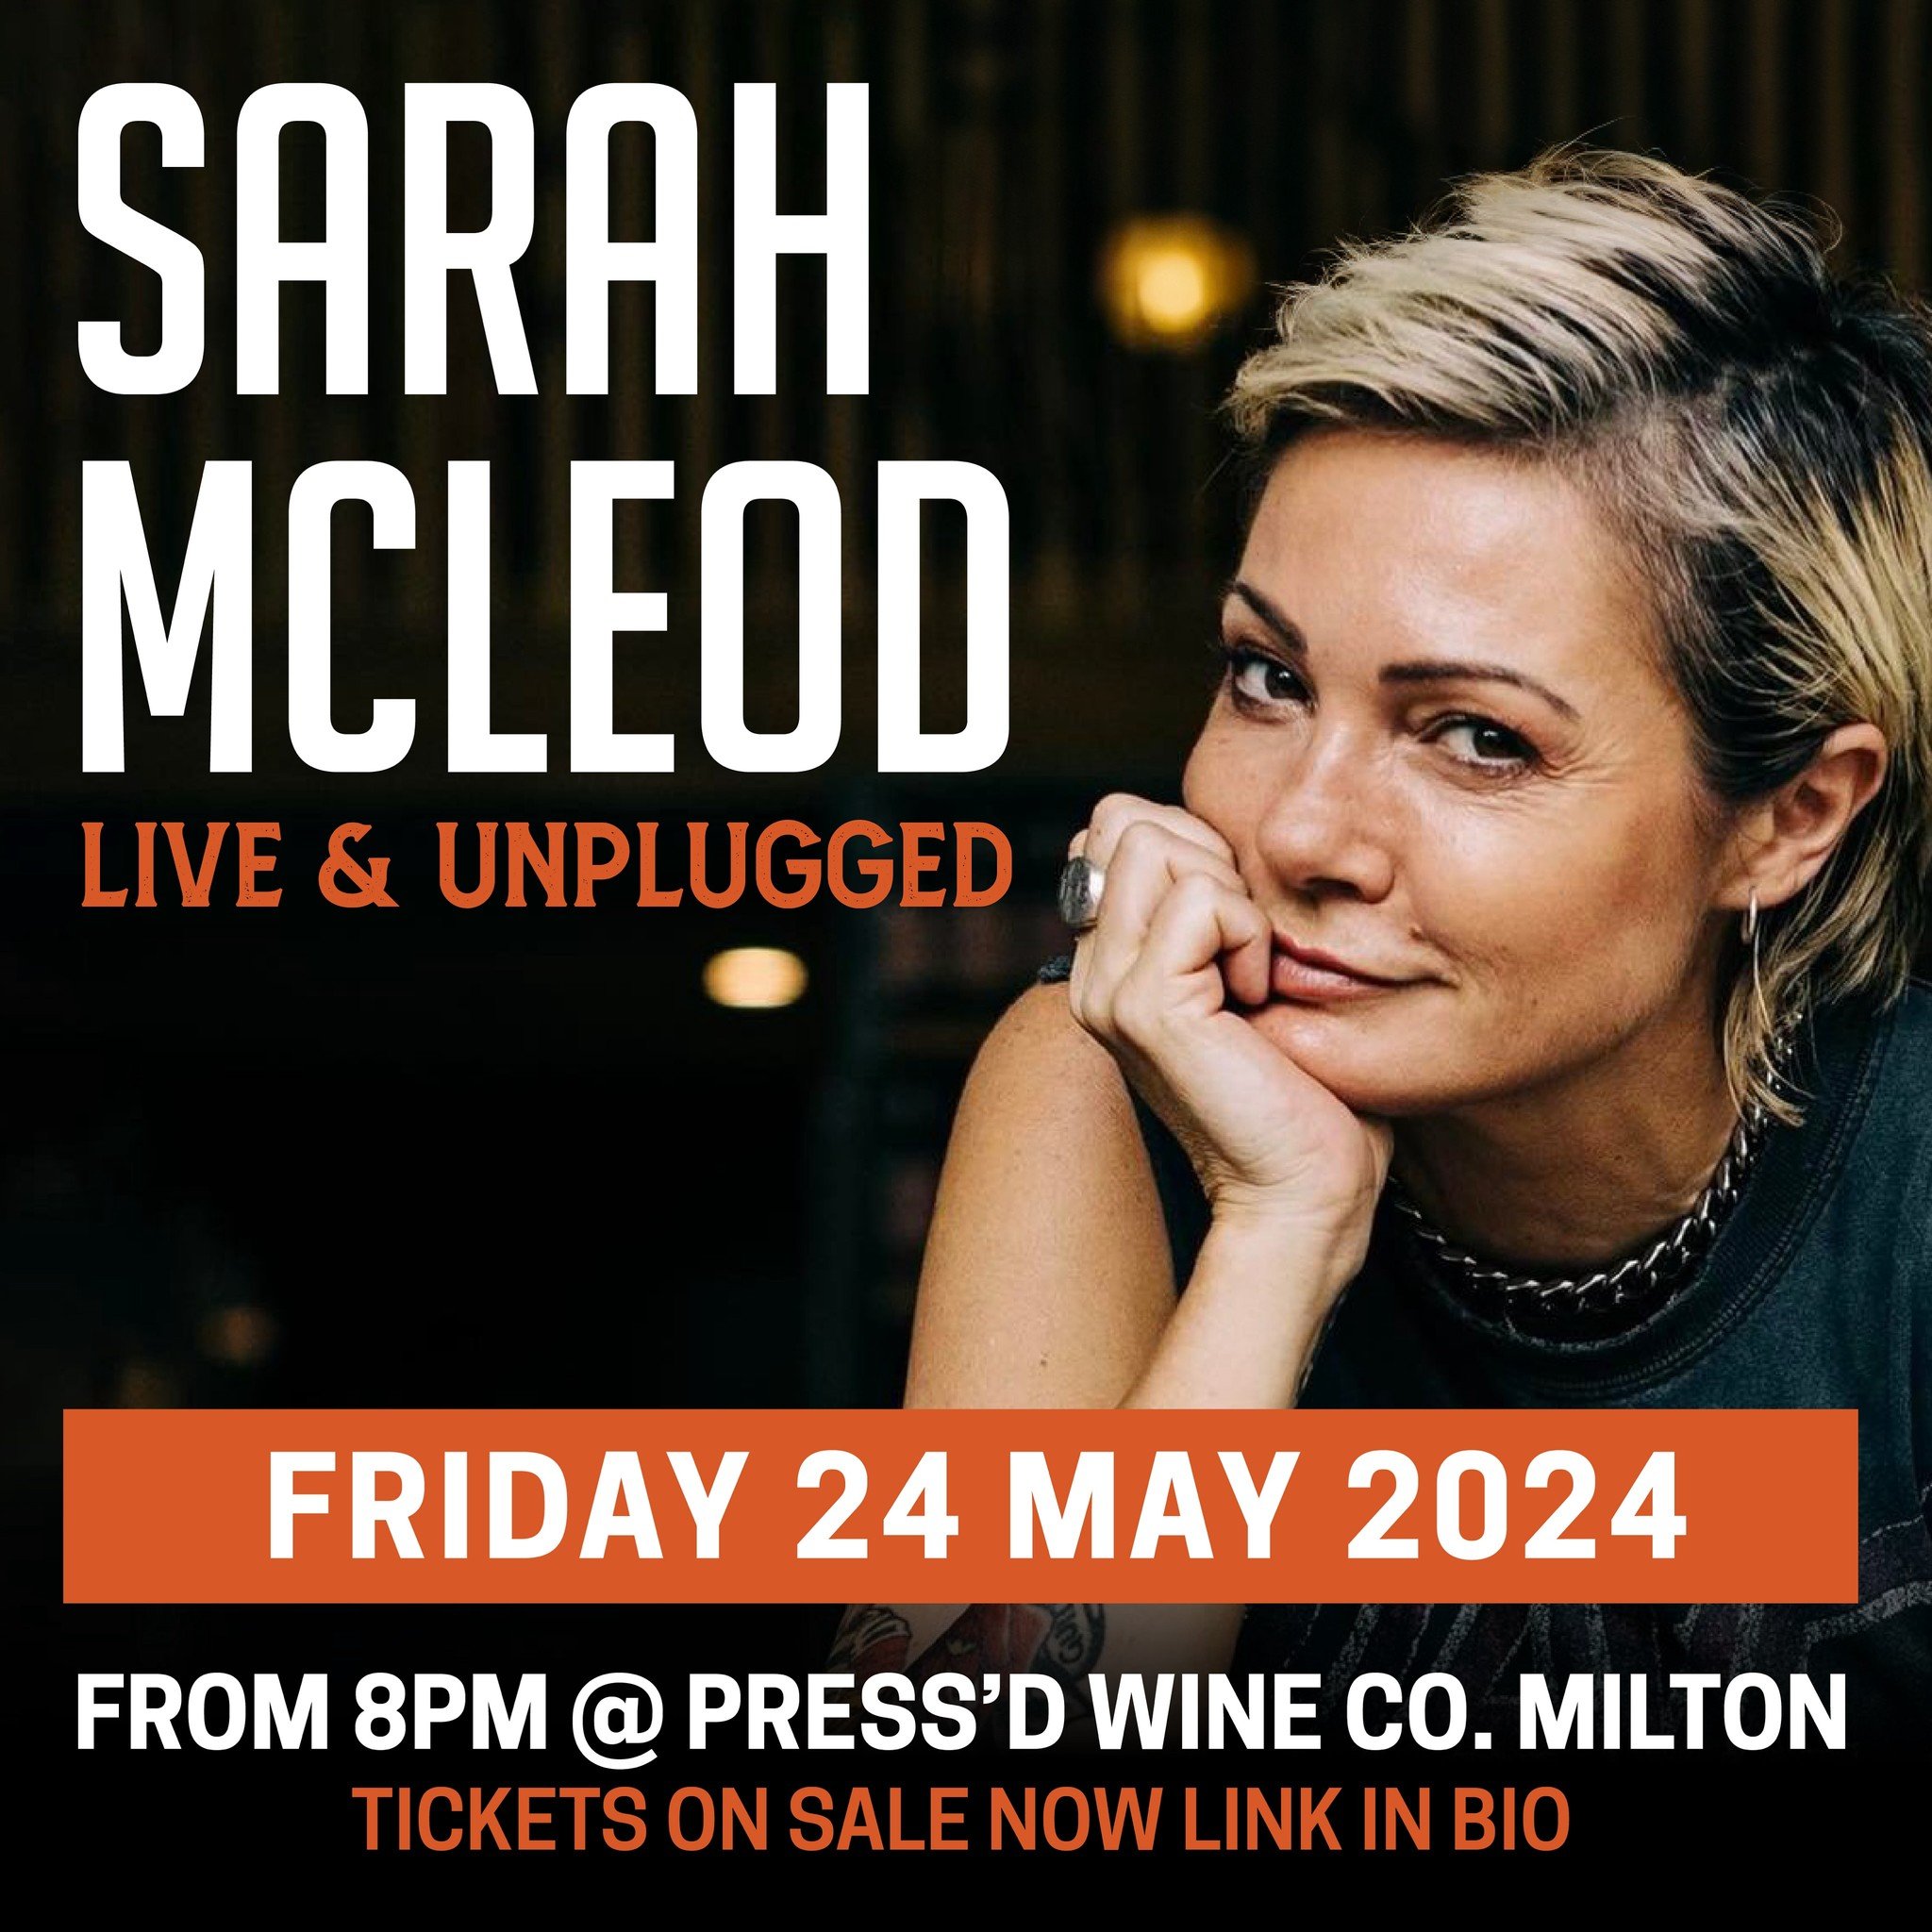 Join us at Press&rsquo;d Wine Co. for an unforgettable evening with the amazing Sarah Mcleod, formerly part of the 3-time Aria award-winning band, &lsquo;Superjesus&rsquo;, as she performs live and unplugged on the Press&rsquo;d deck. Indulge in Tomm